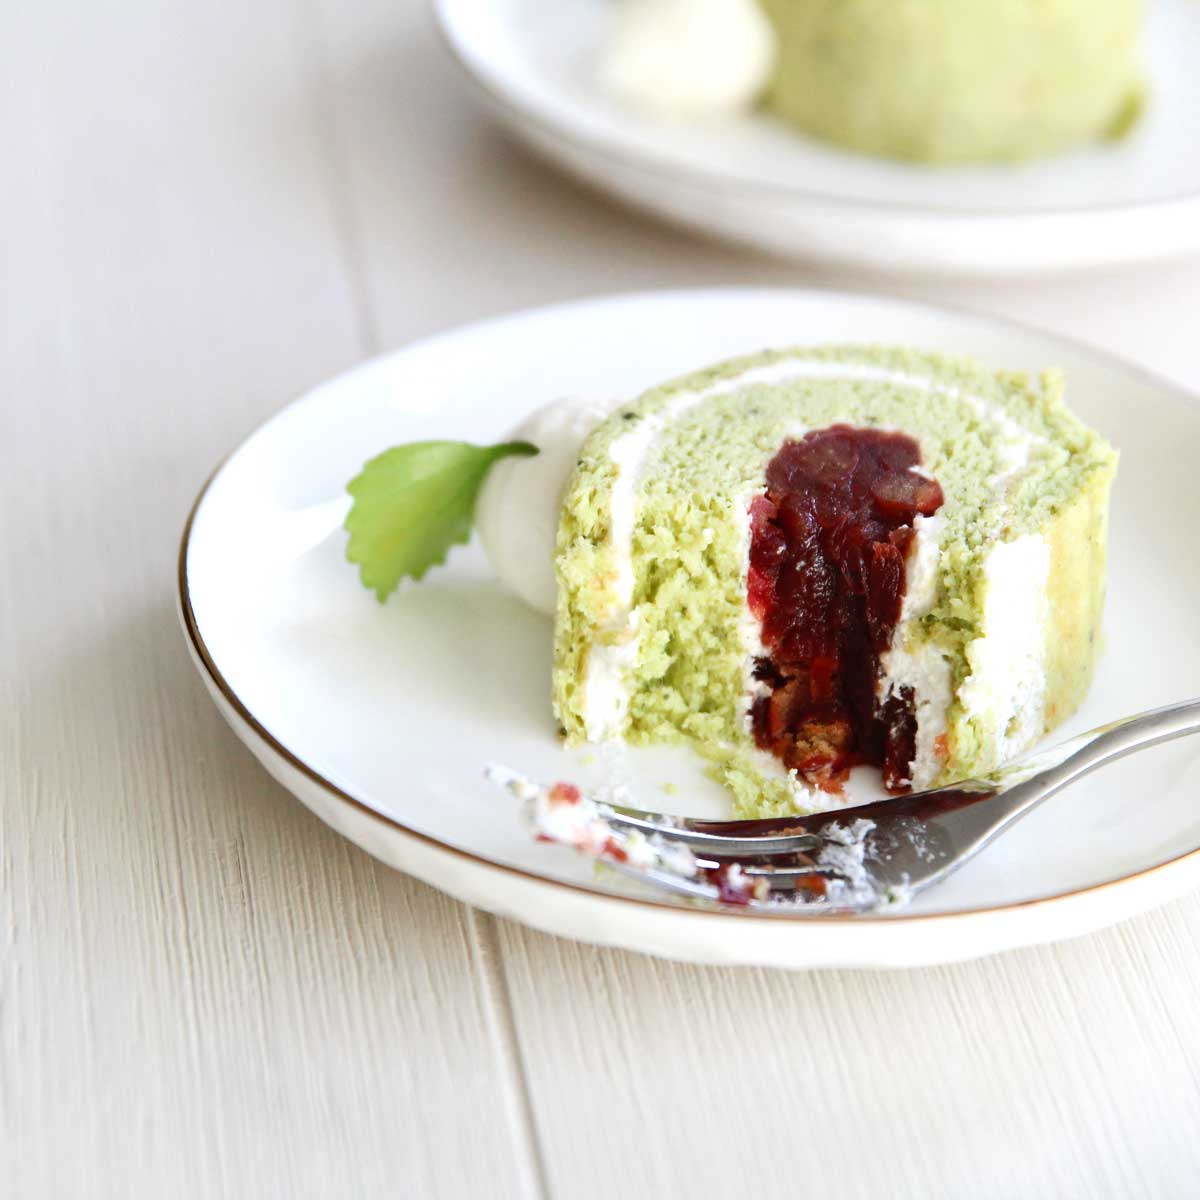 Gluten Free Japanese Matcha Roll Cake with a Sweet Adzuki Filling - Japanese Matcha Roll Cake